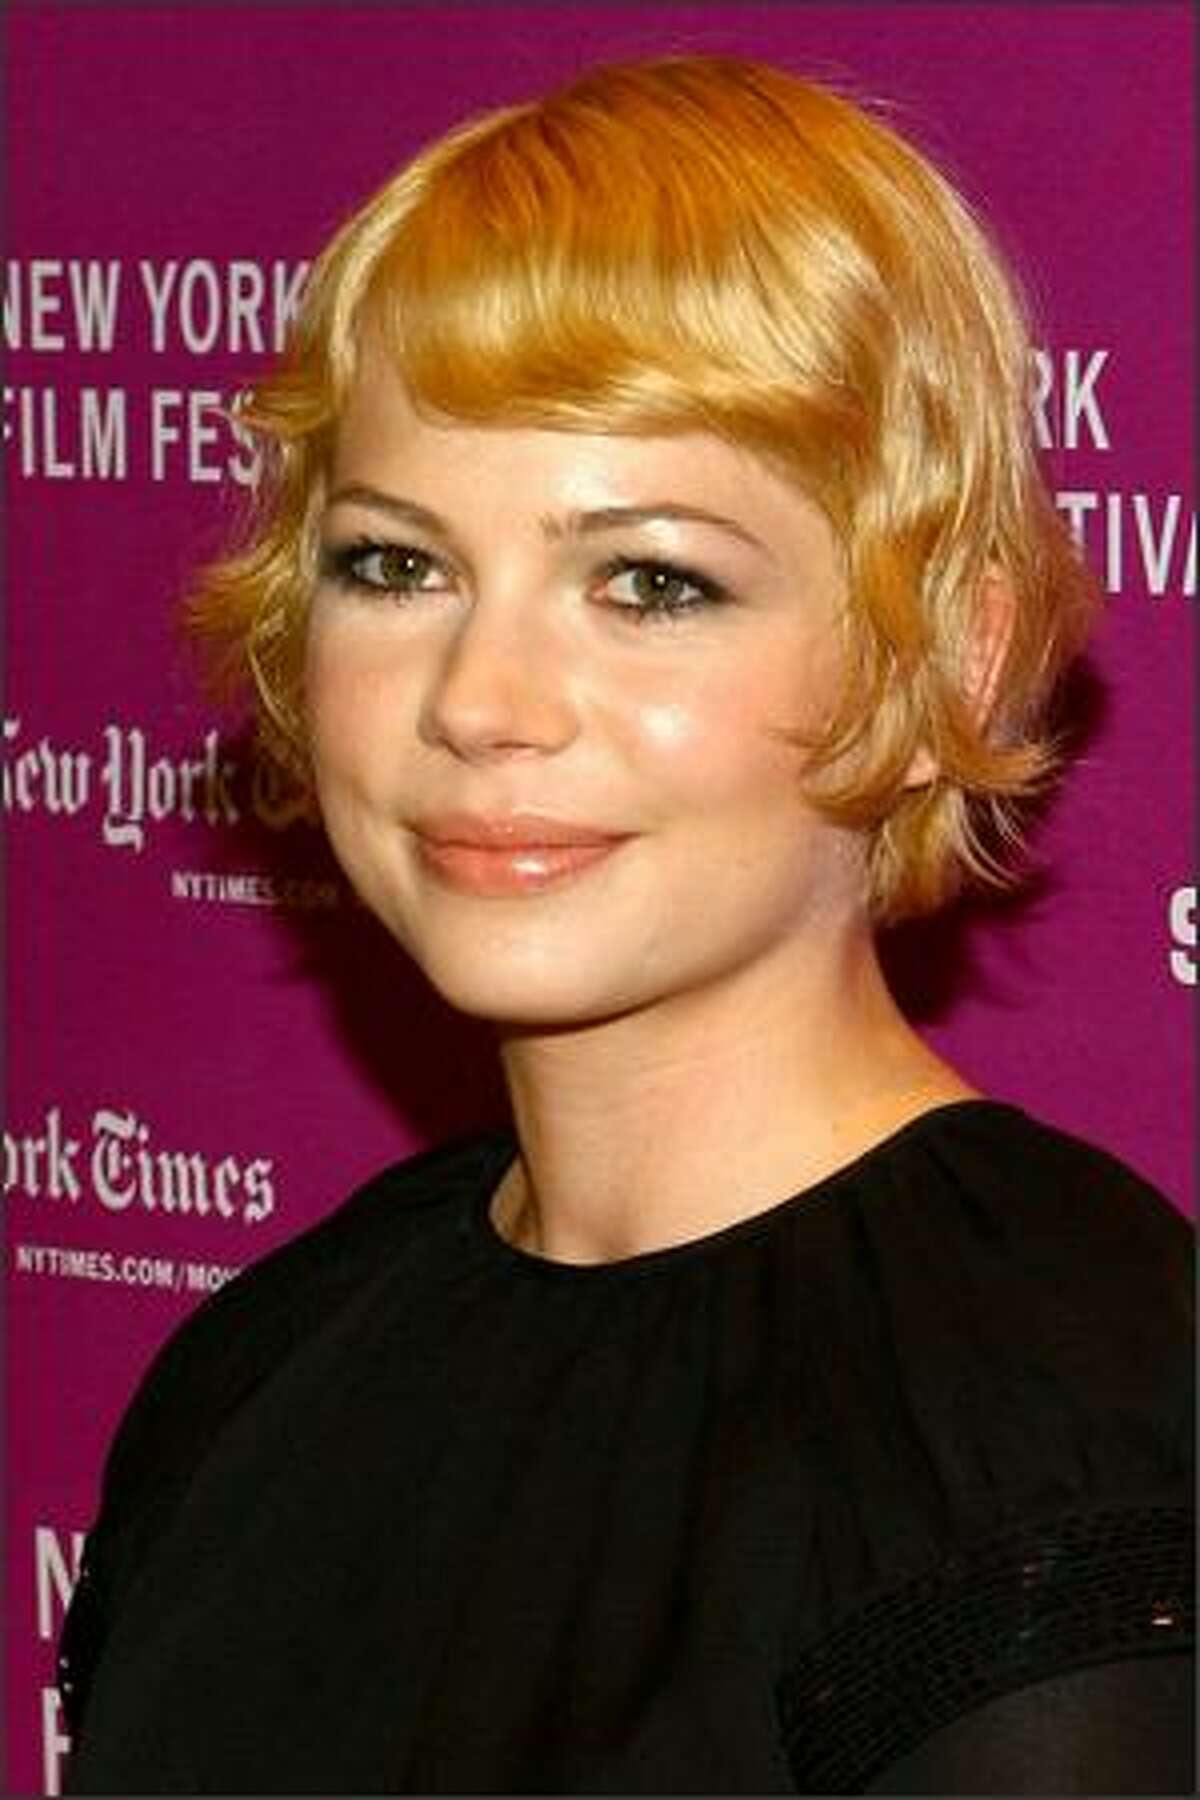 Actress Michelle Williams attends the New York Film Festival screening of "I'm Not There" at Frederick P. Rose Hall October 4, 2007 in New York City.